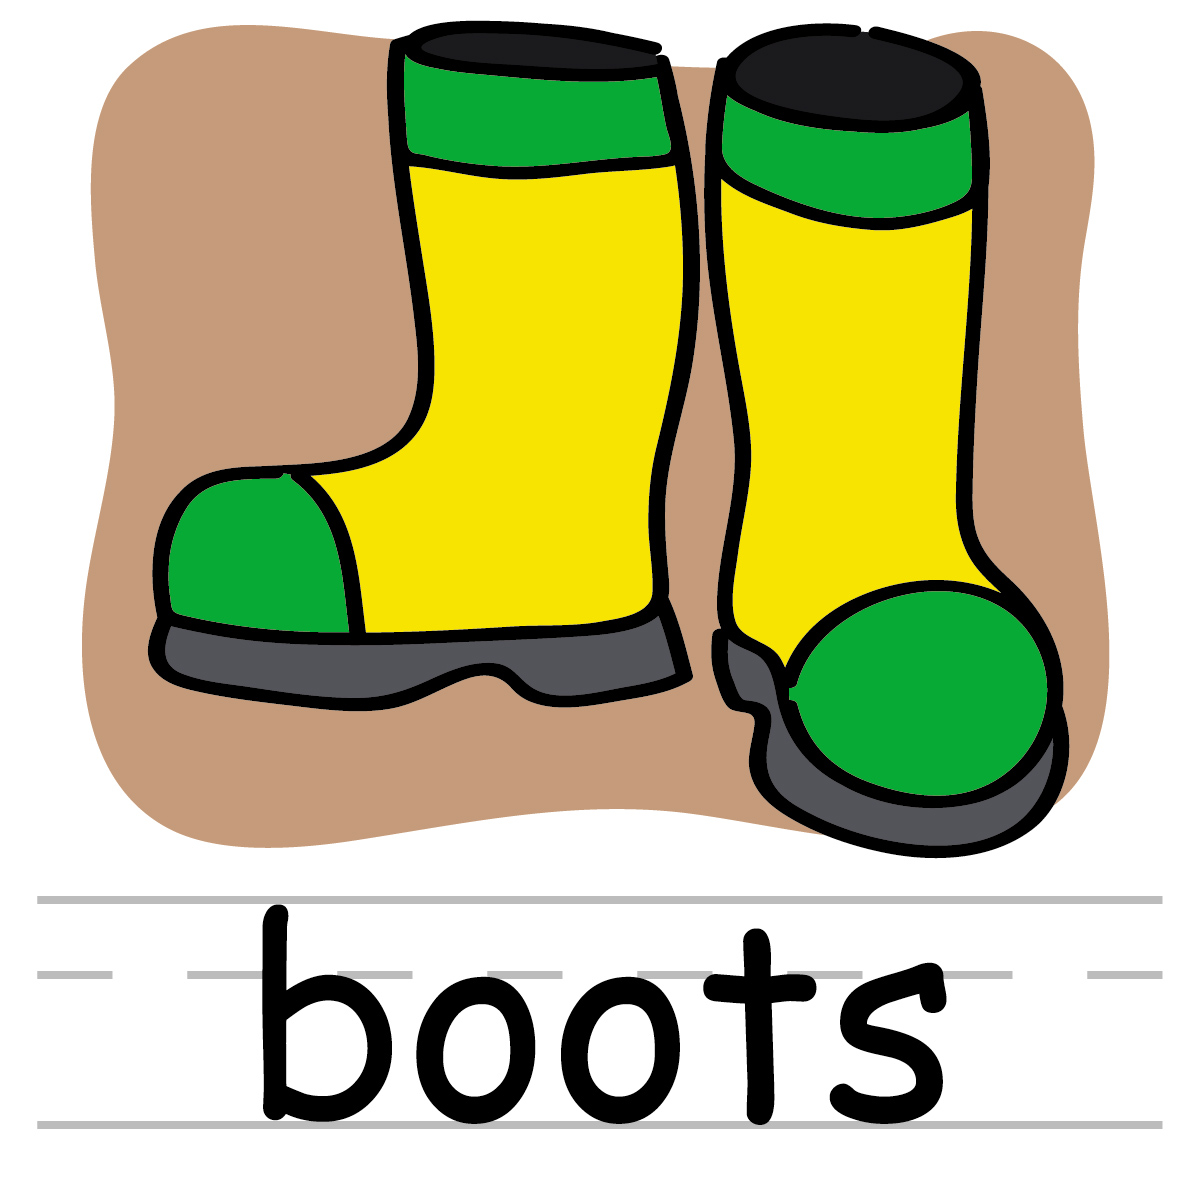 Clothing Drive Clip Art Images & Pictures - Becuo